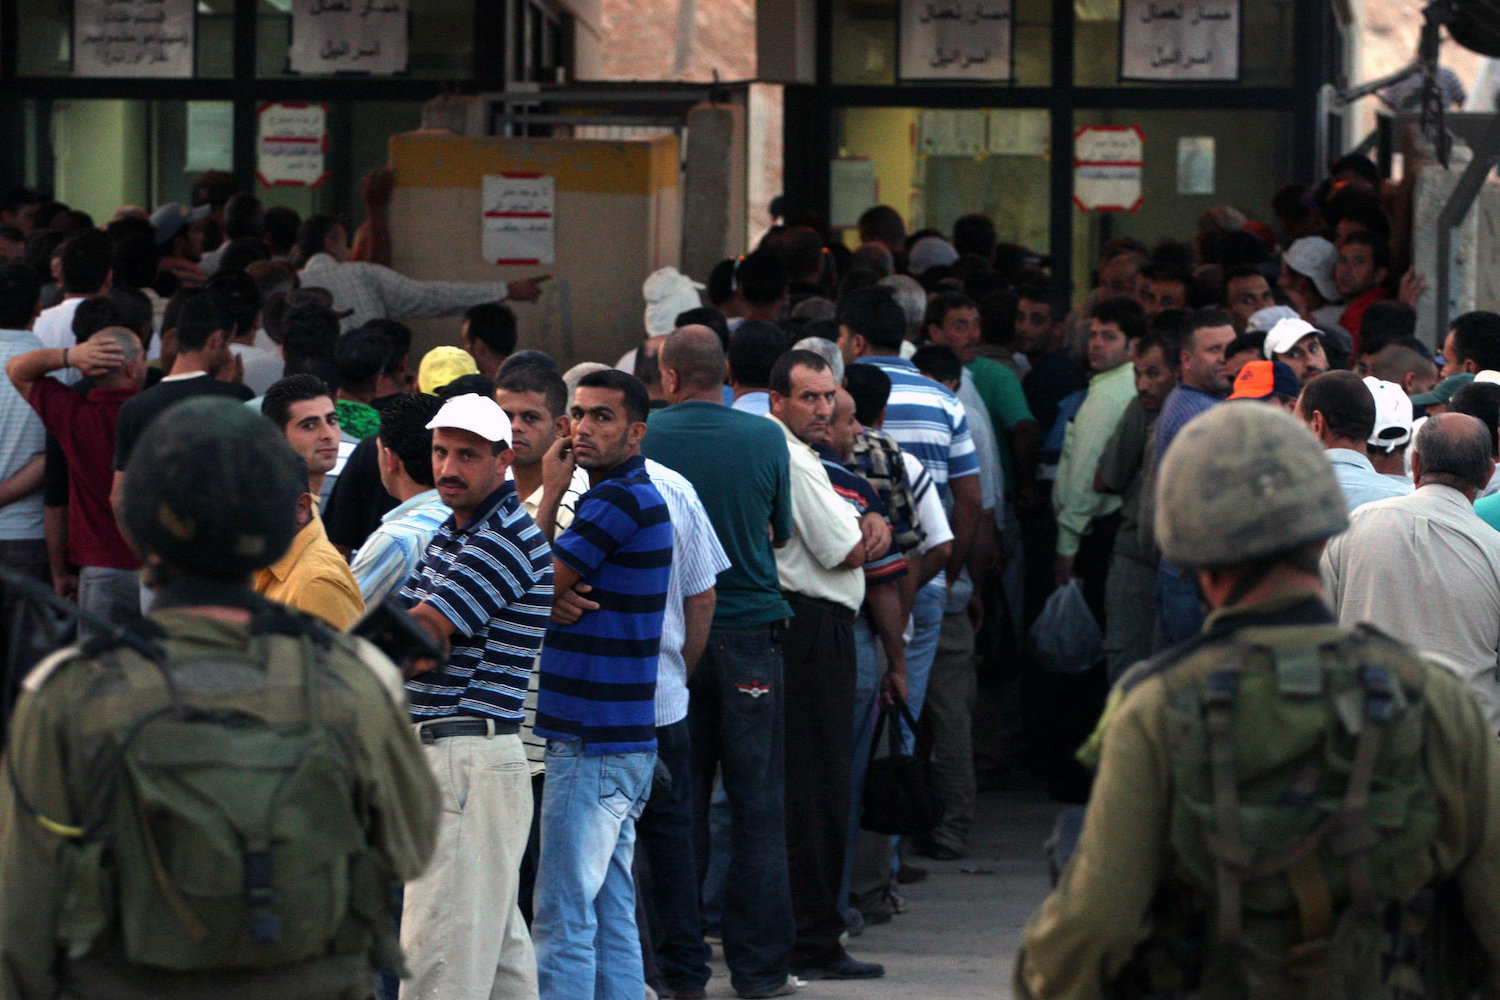 Palestinian workers wait to cross the Isreali-controlled Ni'lin checkpoint, between the West Bank and the Jewish settlement of Modi'in Illit, as they head to work in Israel and nearby settlements on October 4, 2010. (Issam Rimawi/Flash90)